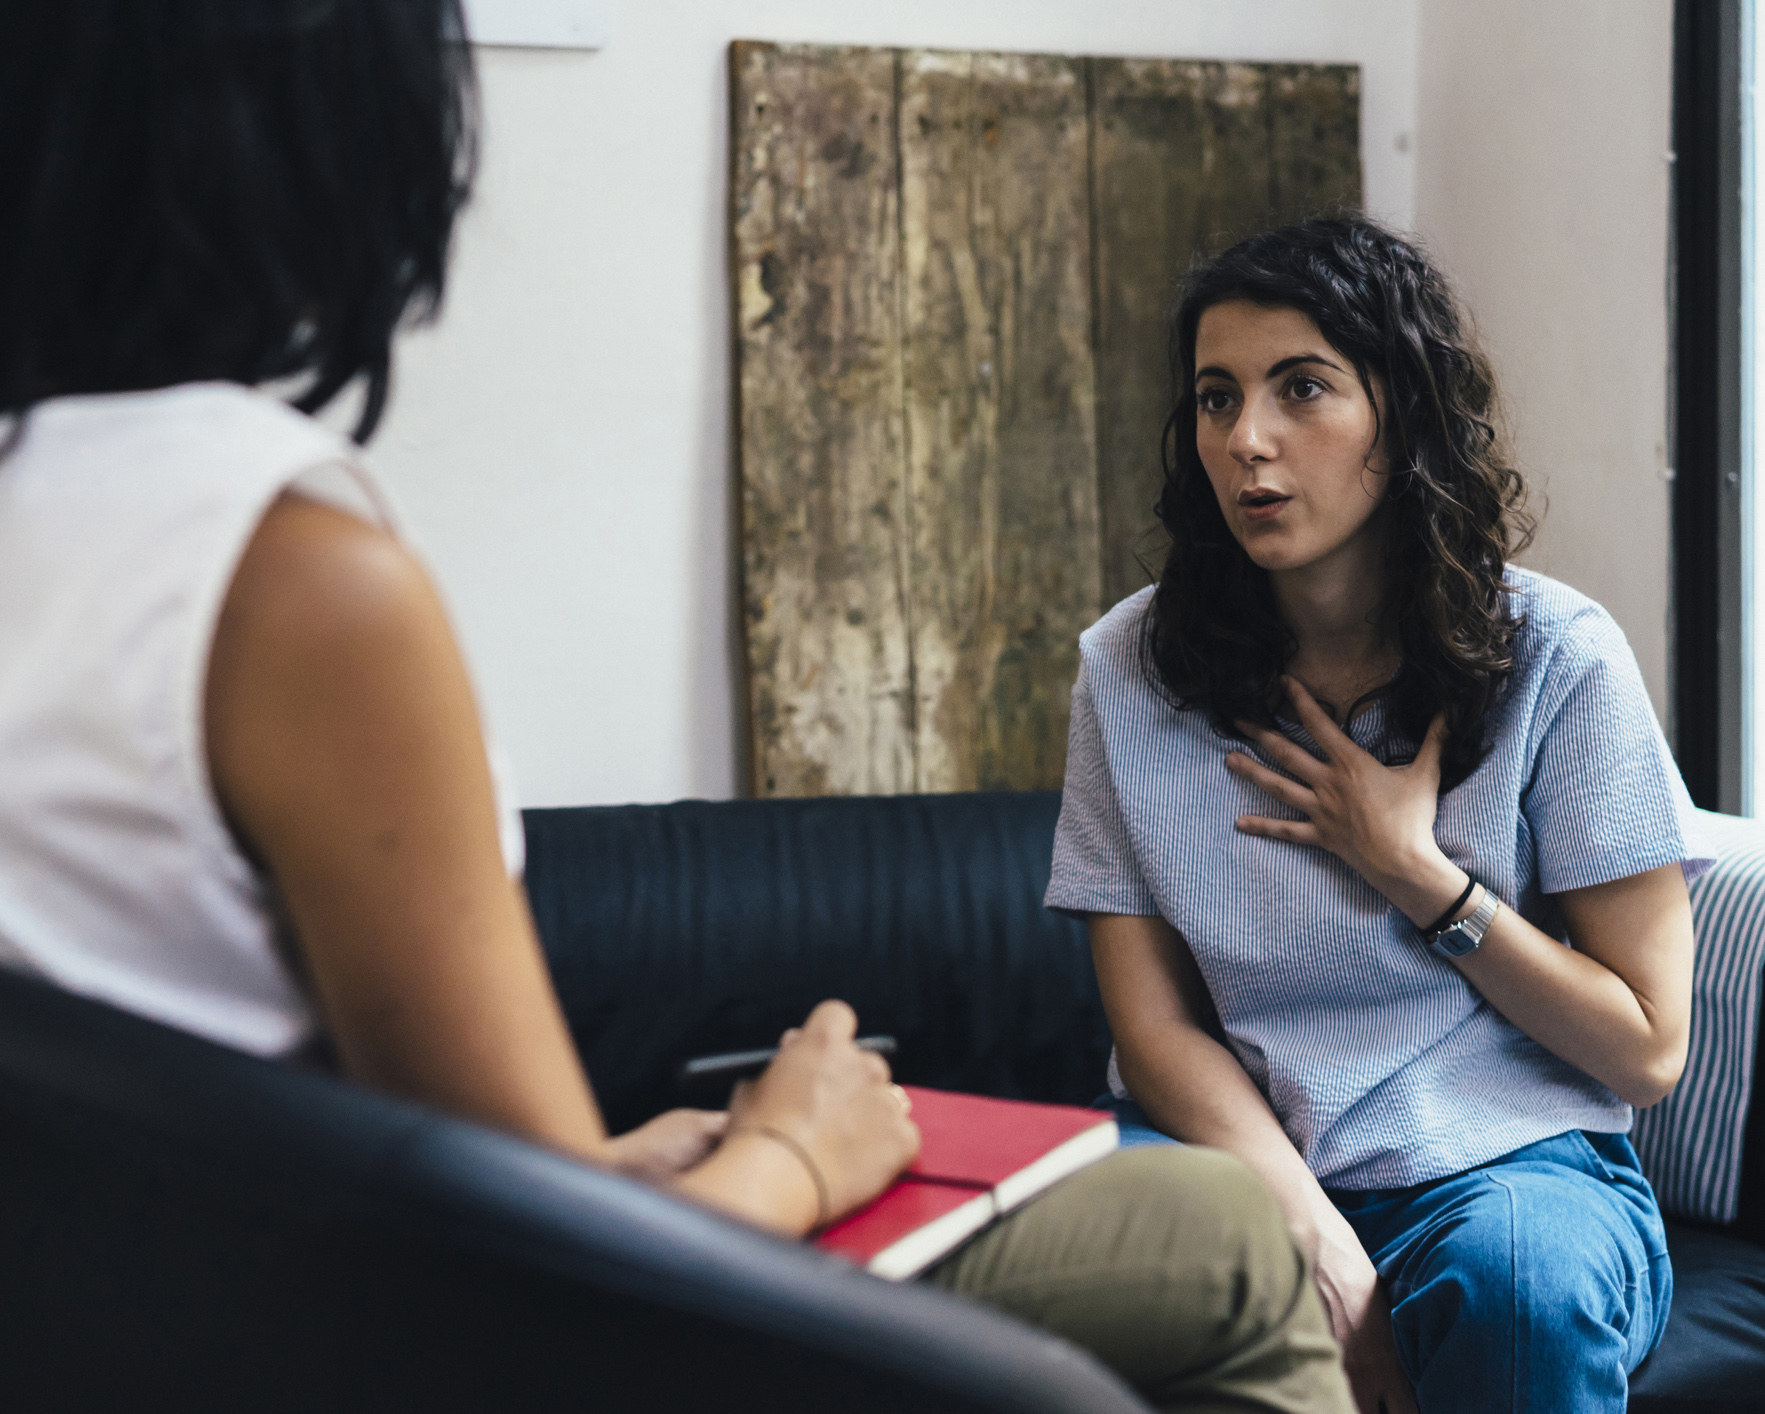 Woman during a psychotherapy session. Attend a session with Cheri Locke a psychotherapist marriage counseling in katy, tx. Schedule your appointment today in Texas. Couples counseling in katy tx wth Cheri Locke at Locke Counseling and Consulting is ready to help.